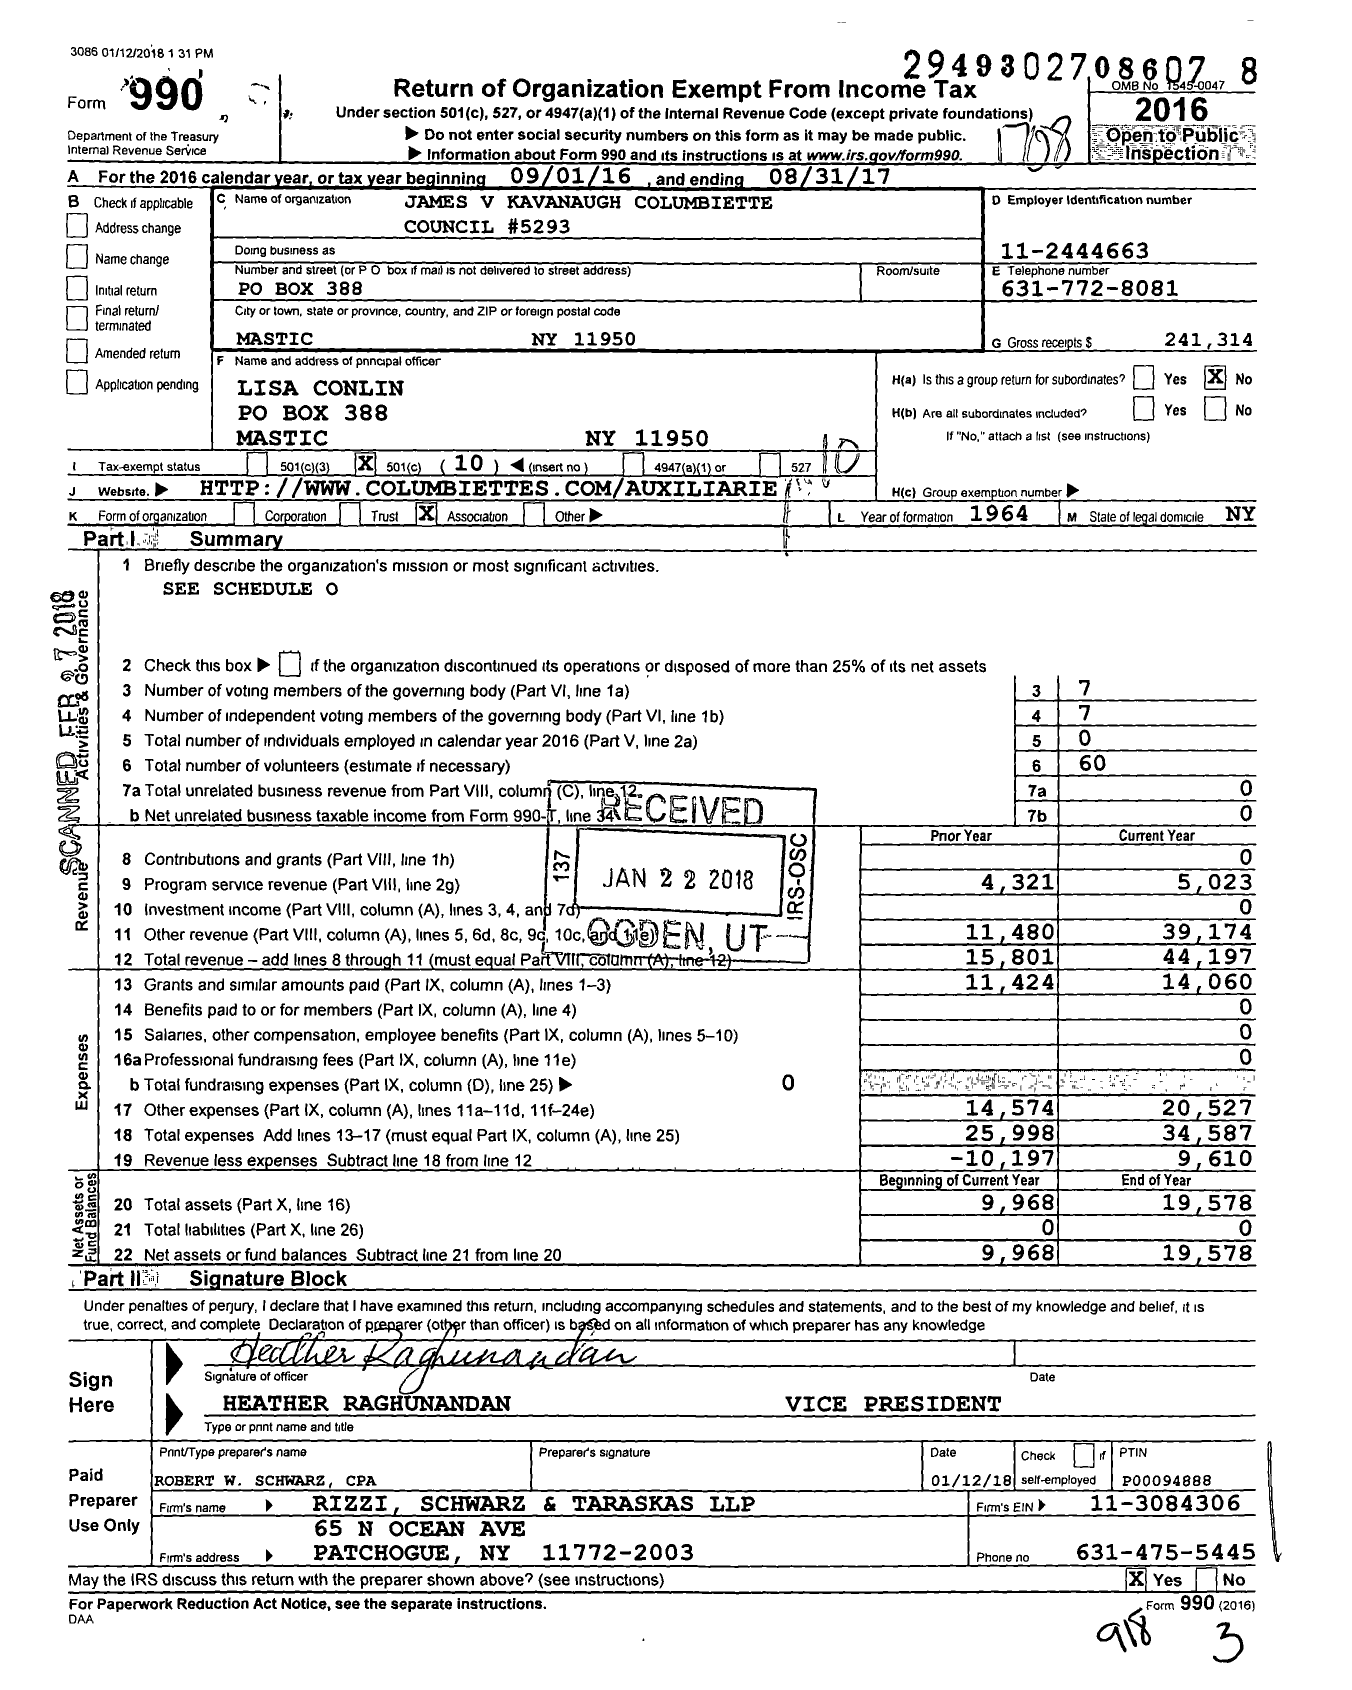 Image of first page of 2016 Form 990O for Columbiettes Incorporated / 5293 James V Kavanaugh Columbiettes